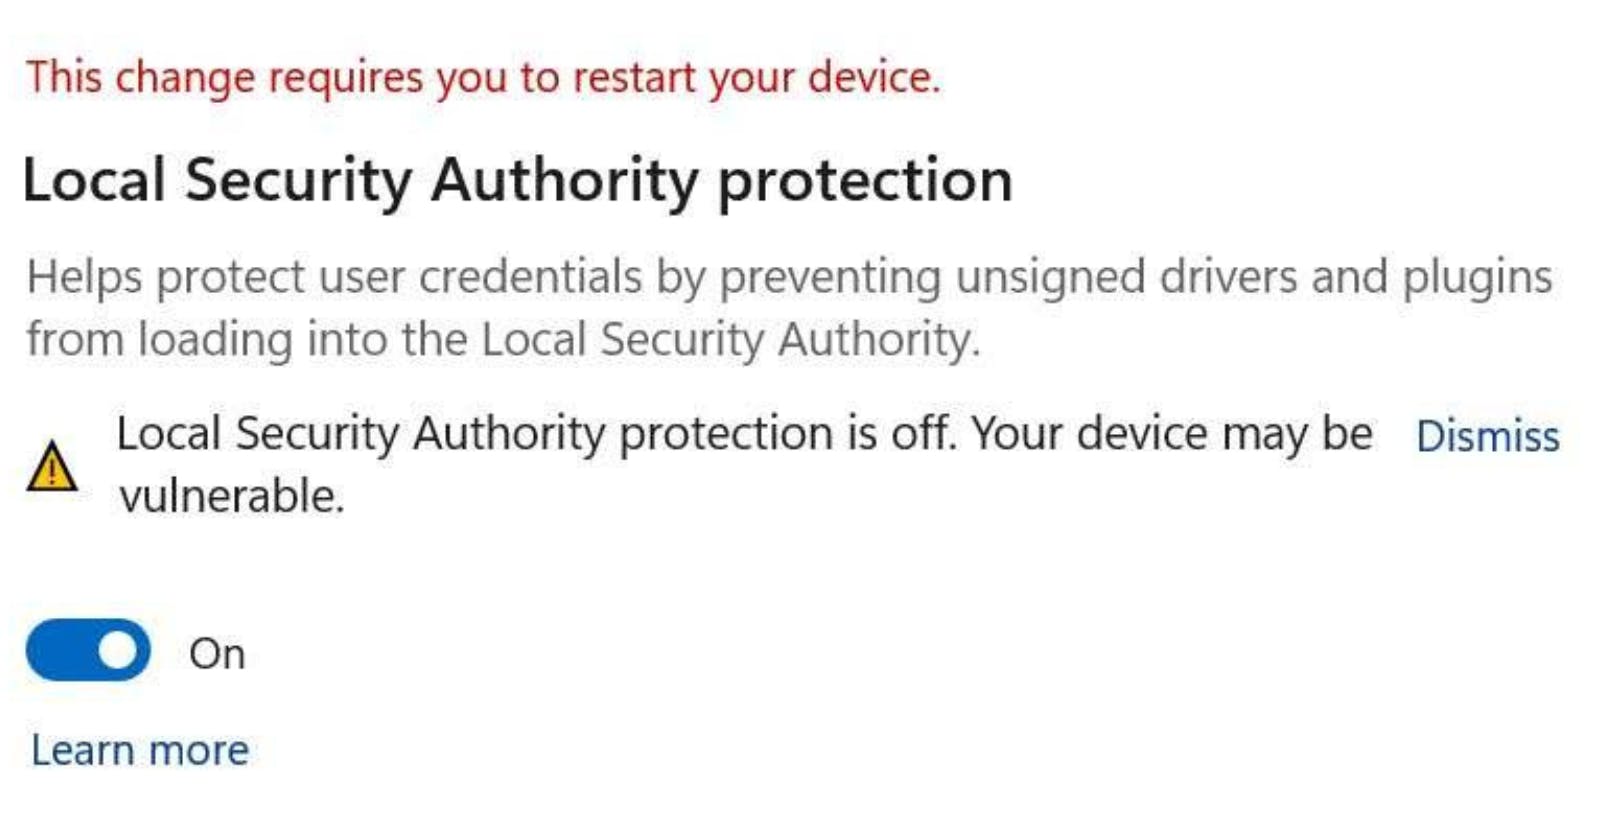 How to Dismiss “Local Security Authority Protection Is Off” in Windows 11